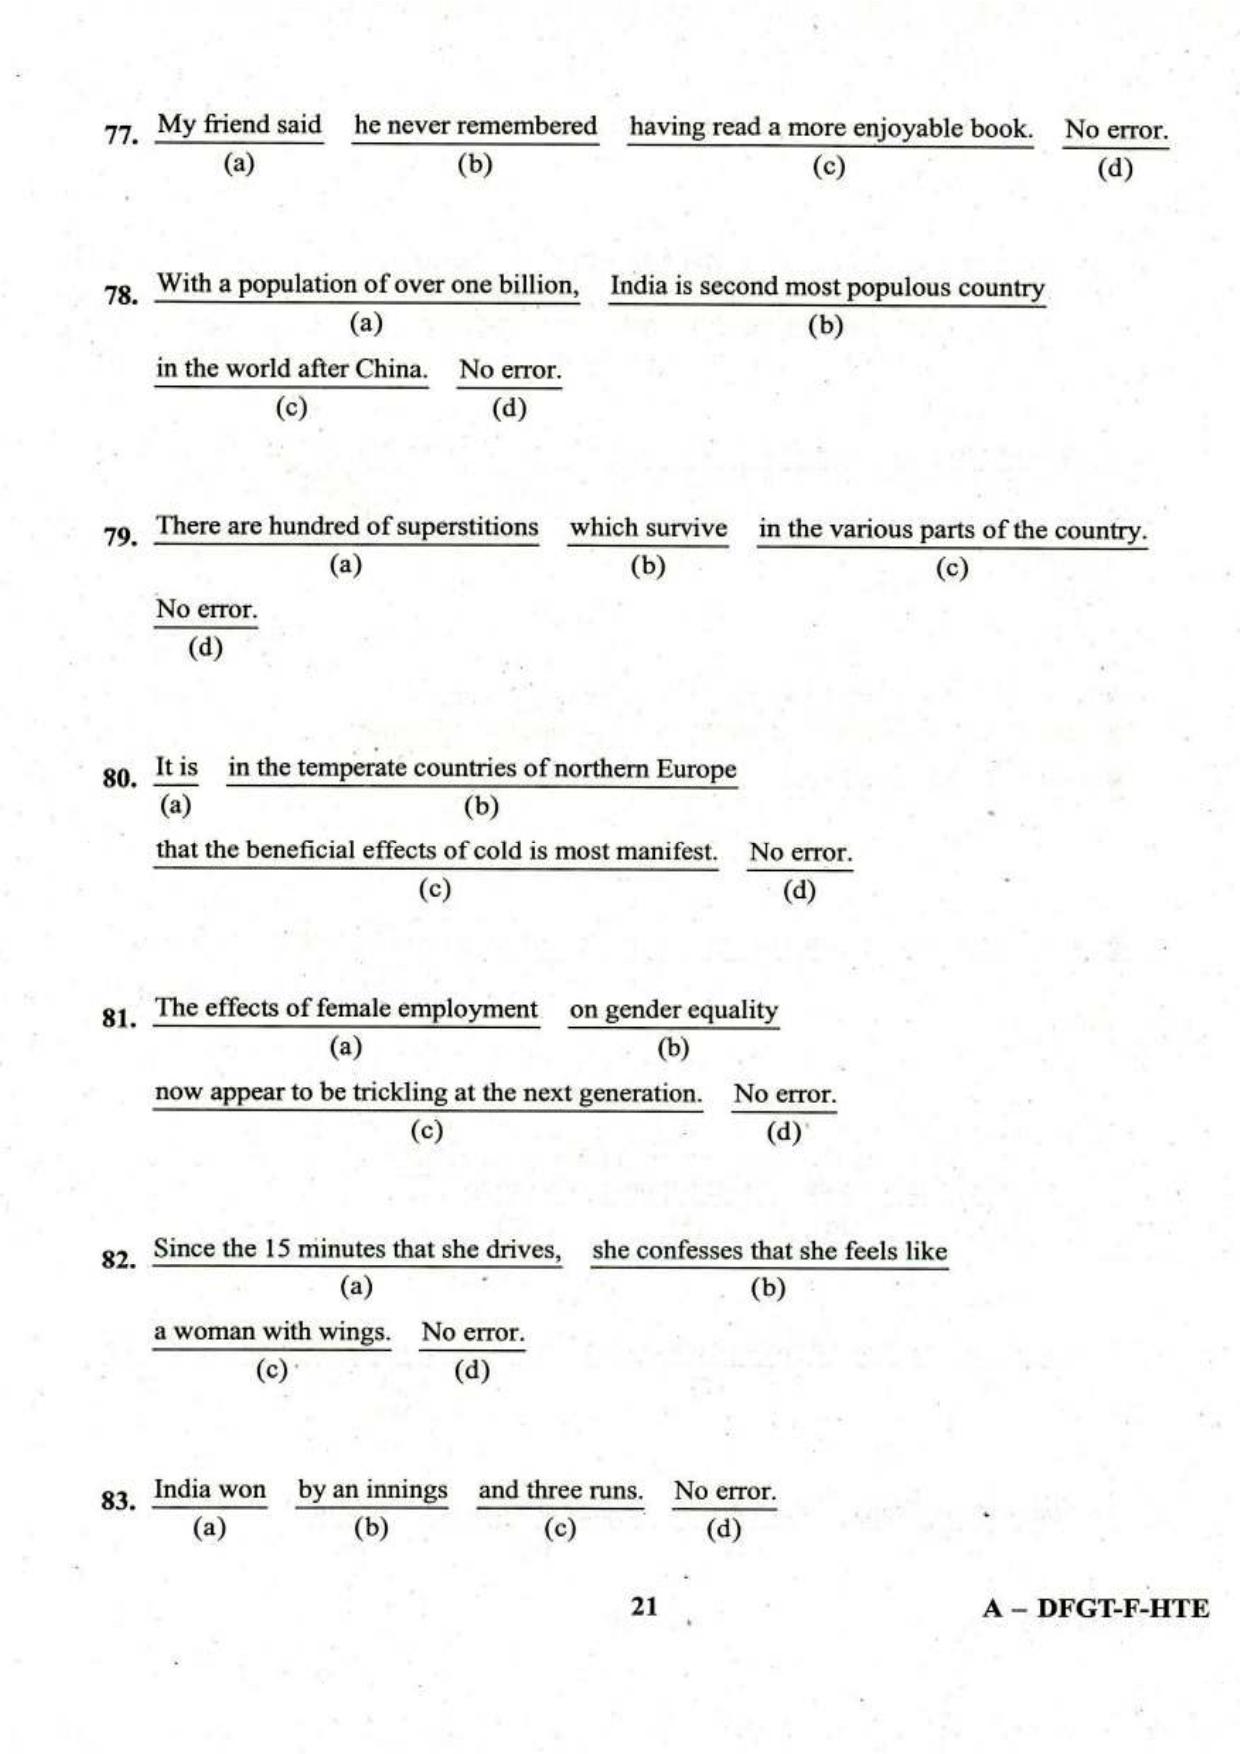 PBSSD General English Old Papers For BLS, PADEO, SPDM, and DPM - Page 21